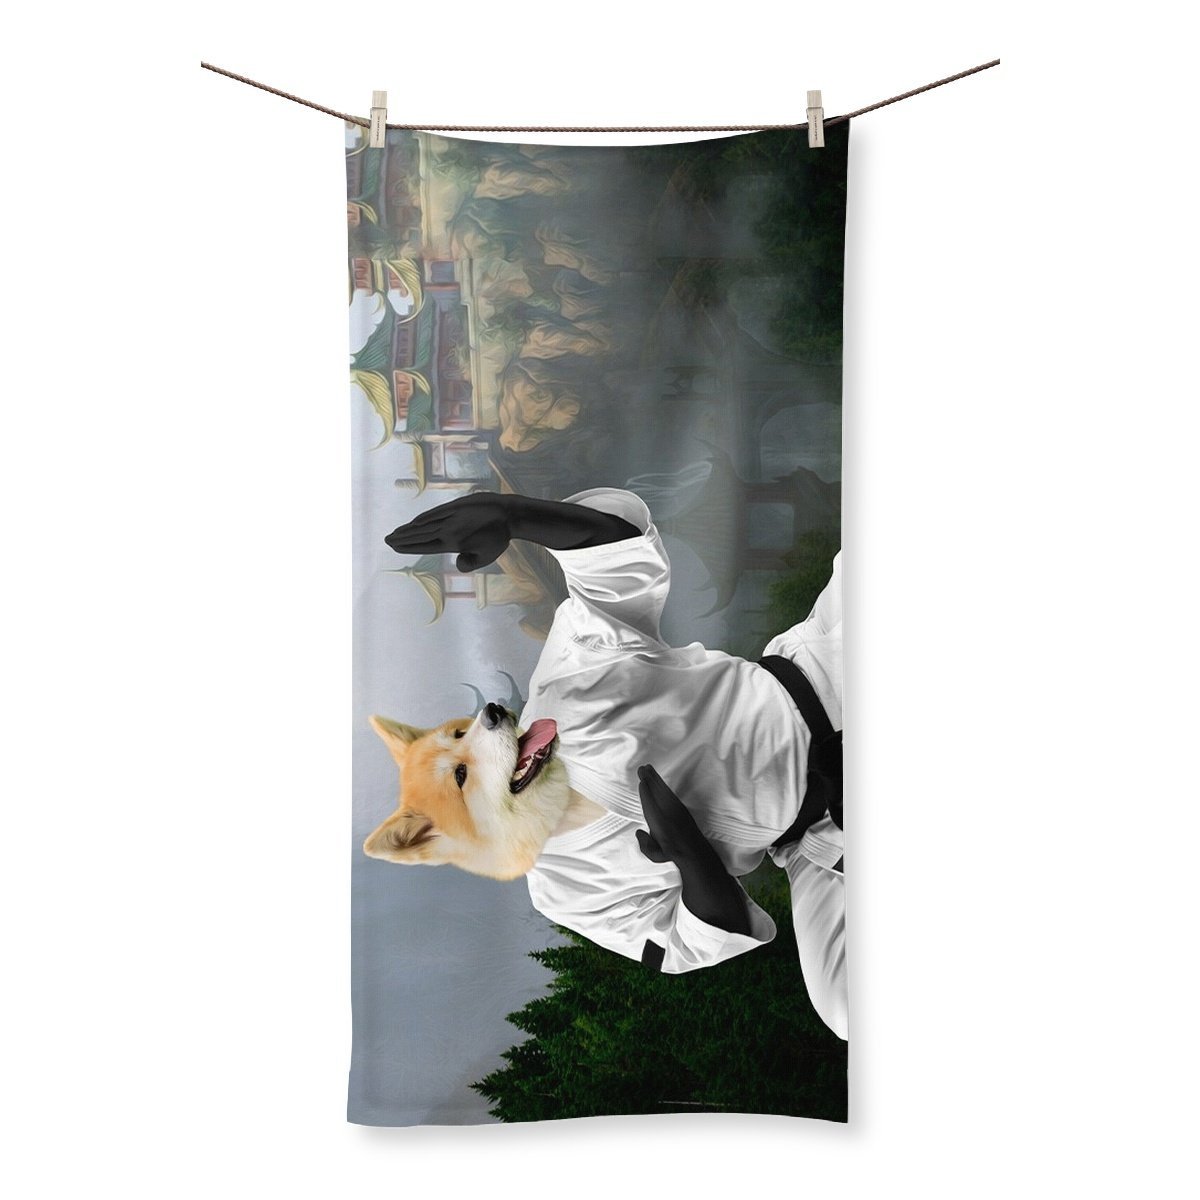 The Karate Master: Custom Pet Towel - Paw & Glory - #pet portraits# - #dog portraits# - #pet portraits uk#Paw & Glory, paw and glory, admiral dog portrait, drawing pictures of pets, paintings of pets from photos, painting of your dog, dog portraits as humans, draw your pet portrait, pet portraits,pet art Towel